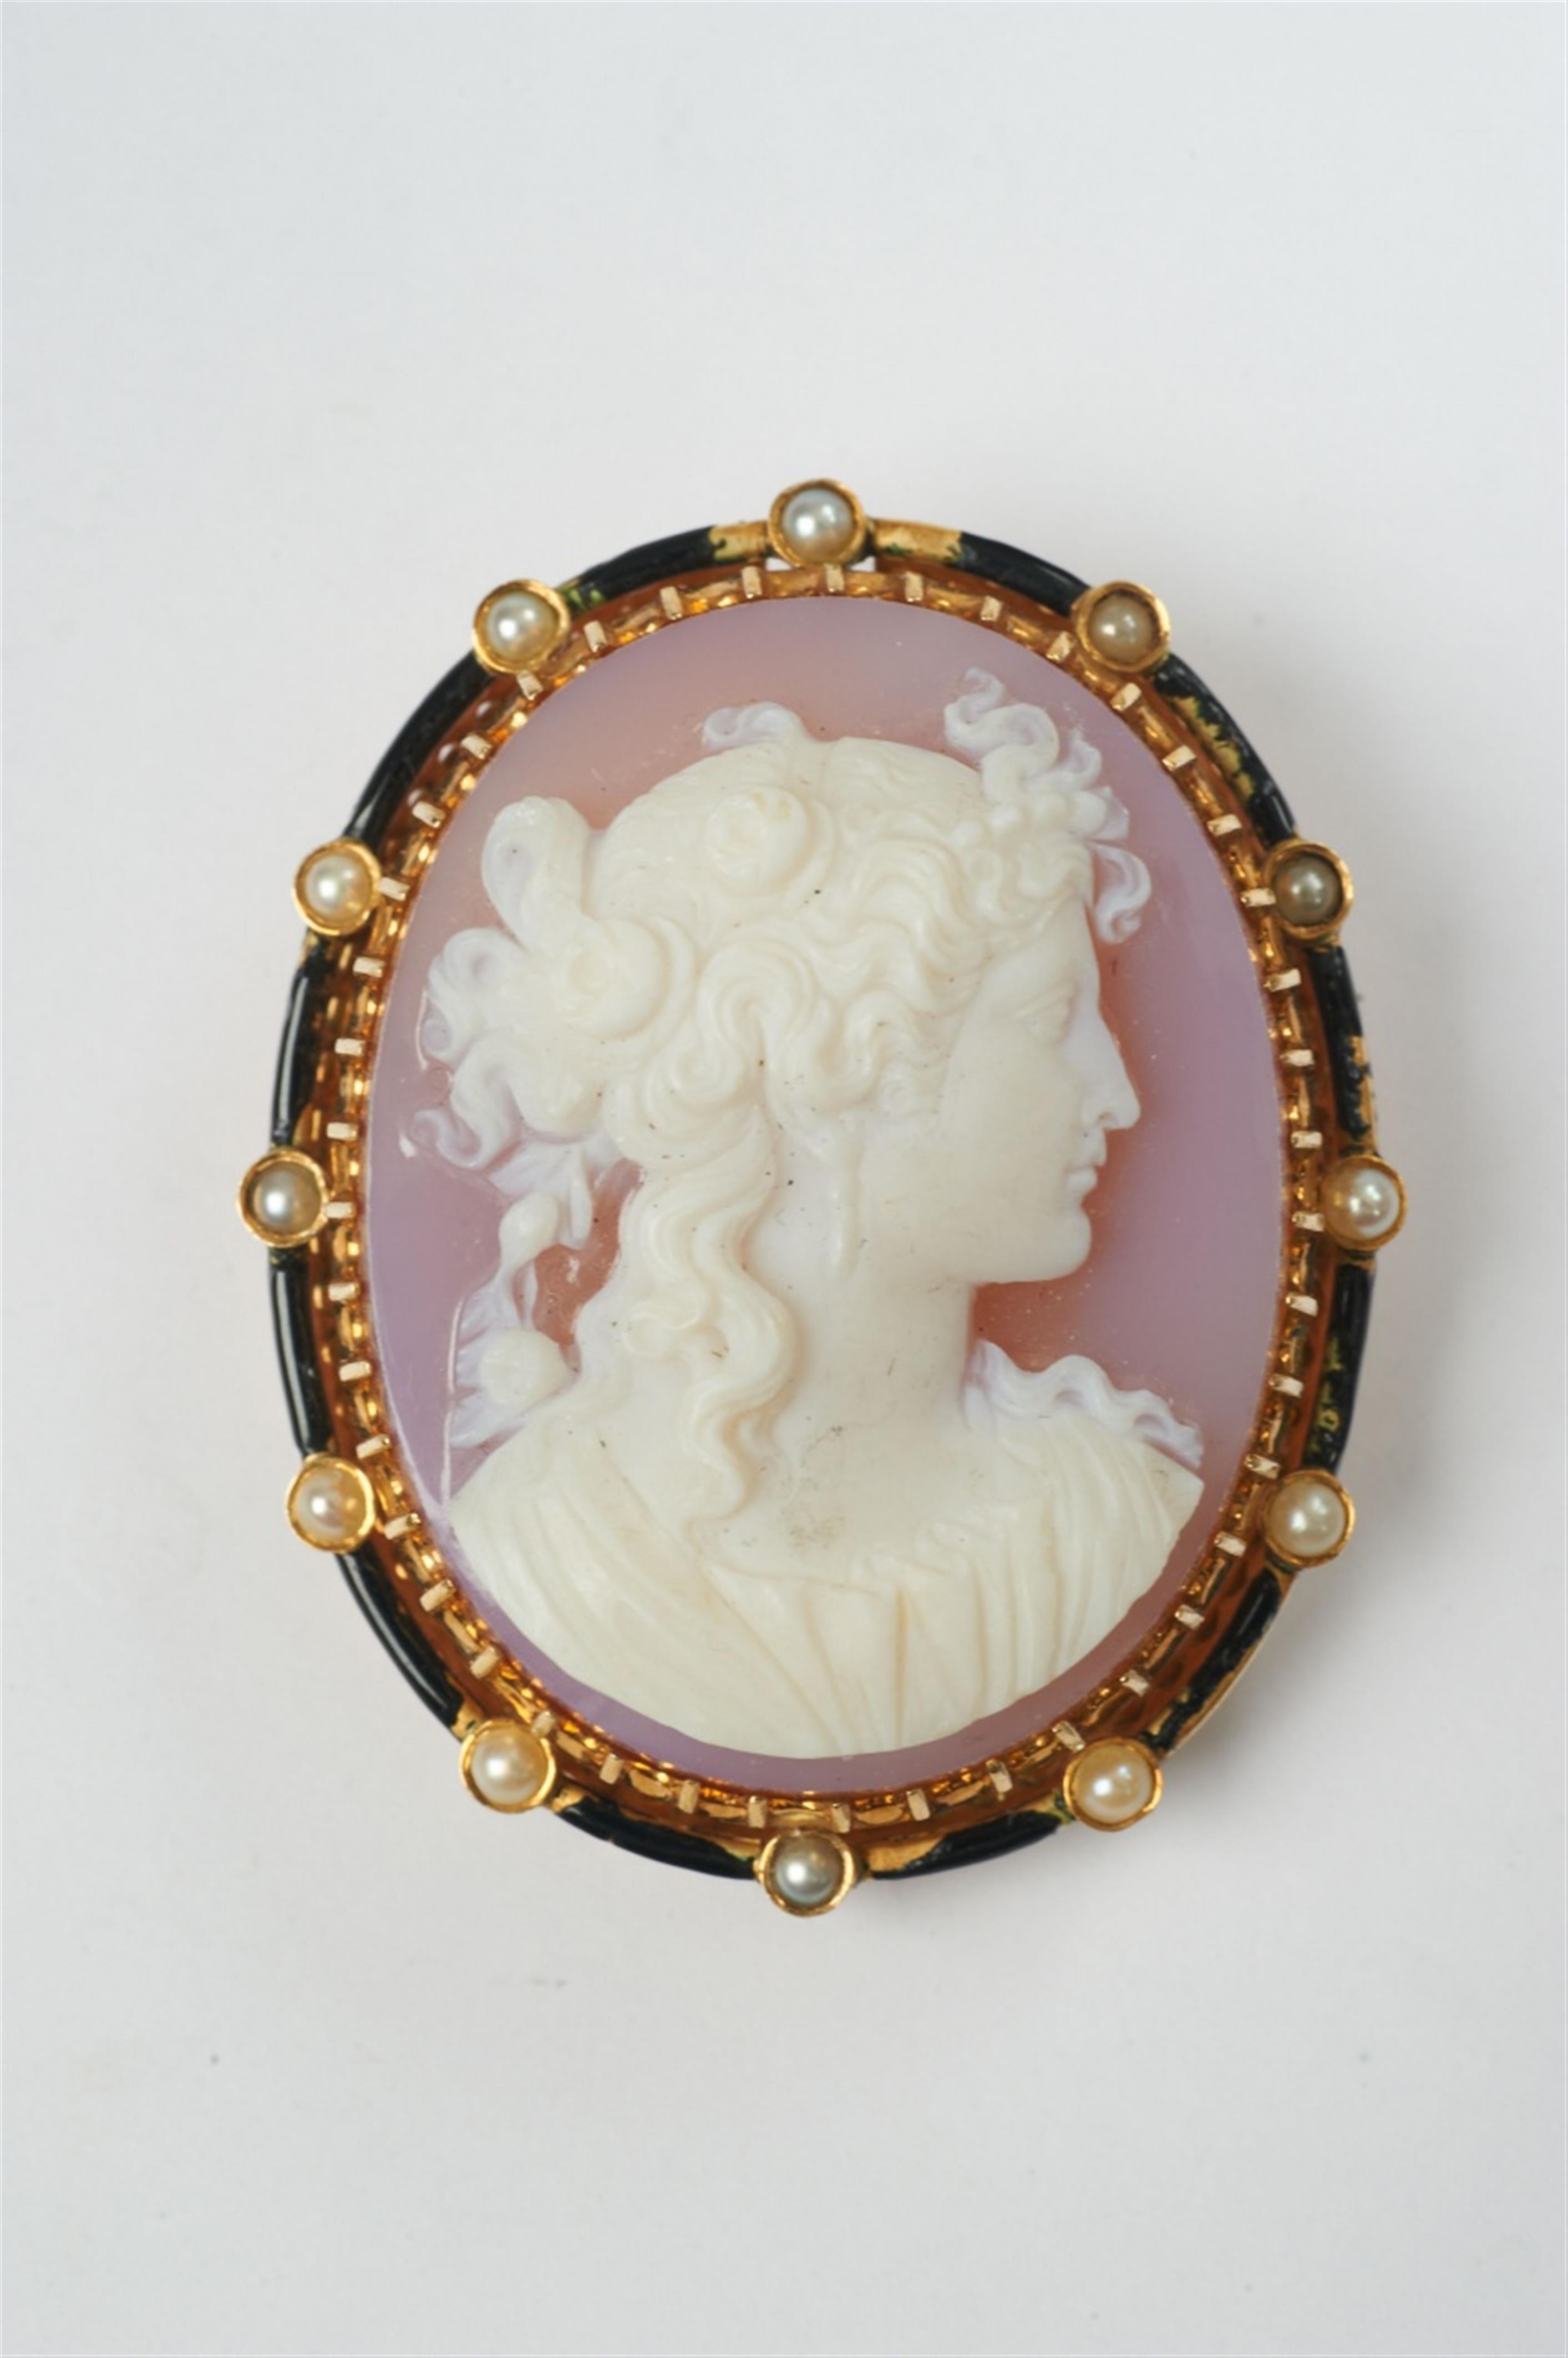 An 18k gold, enamel and agate cameo pendant brooch - image-1